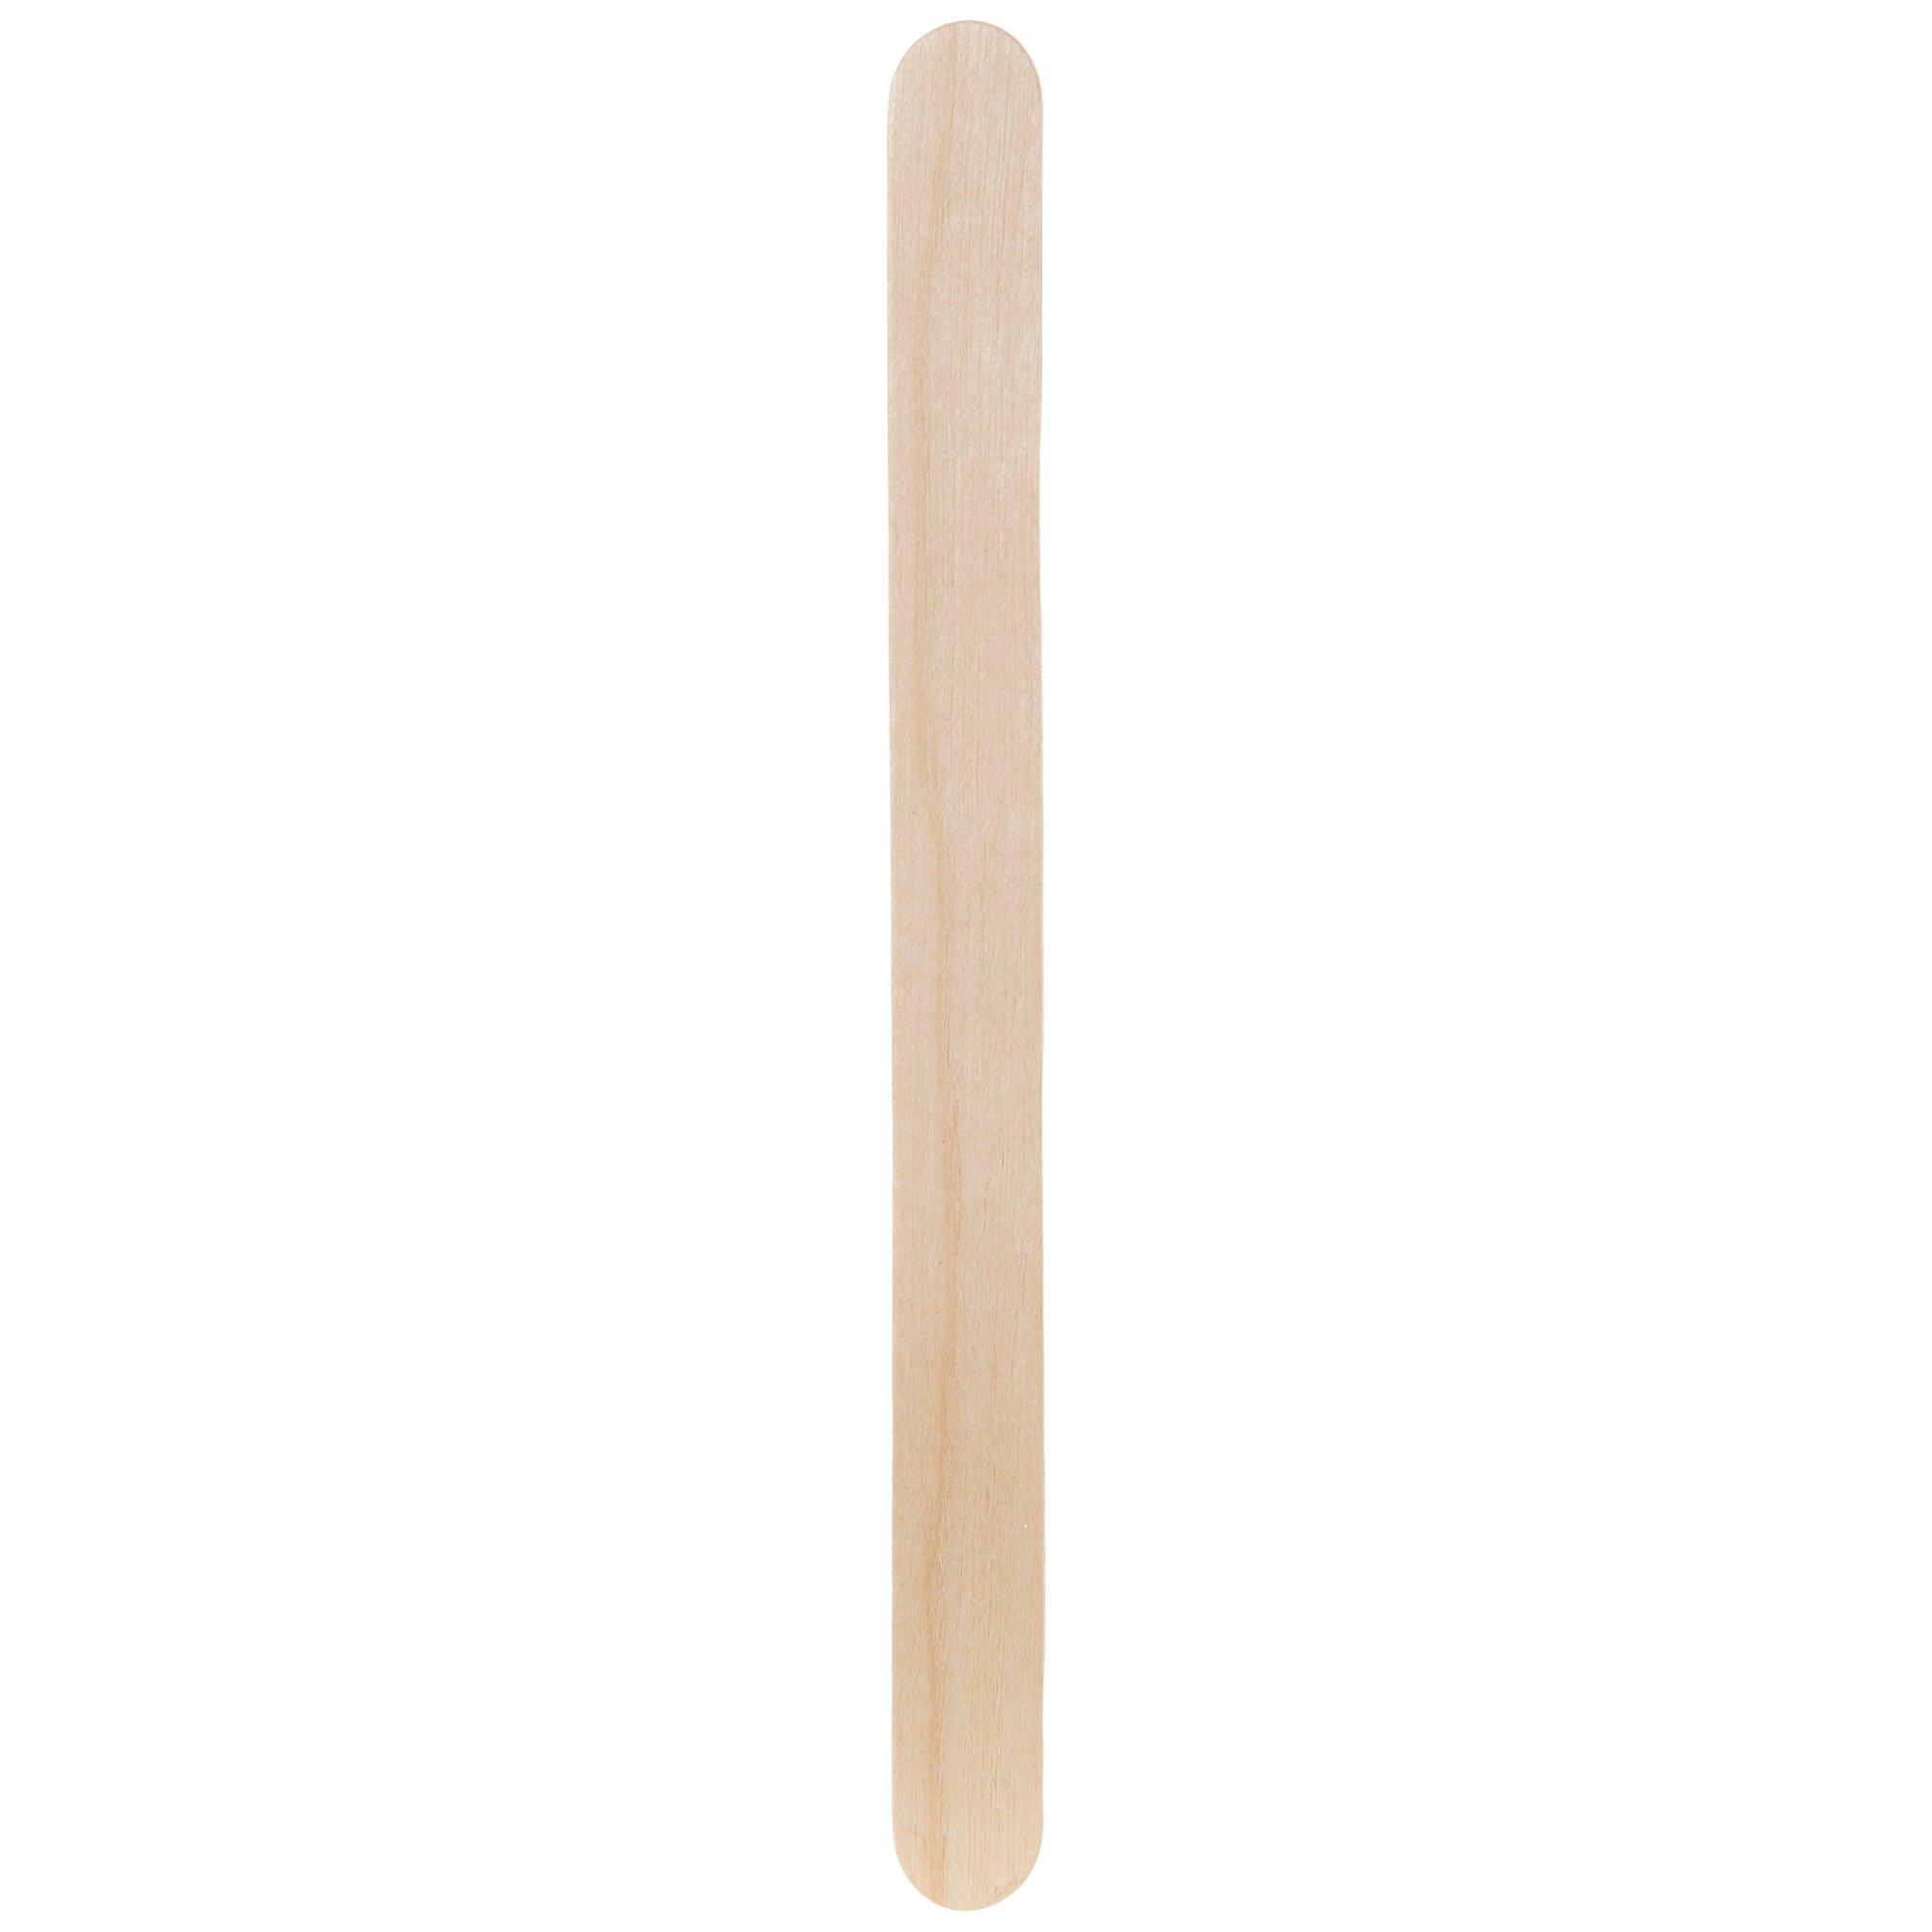 [1000 Count] 4.5 inch Wooden Multi-Purpose Popsicle Sticks for Crafts, Ices, Ice